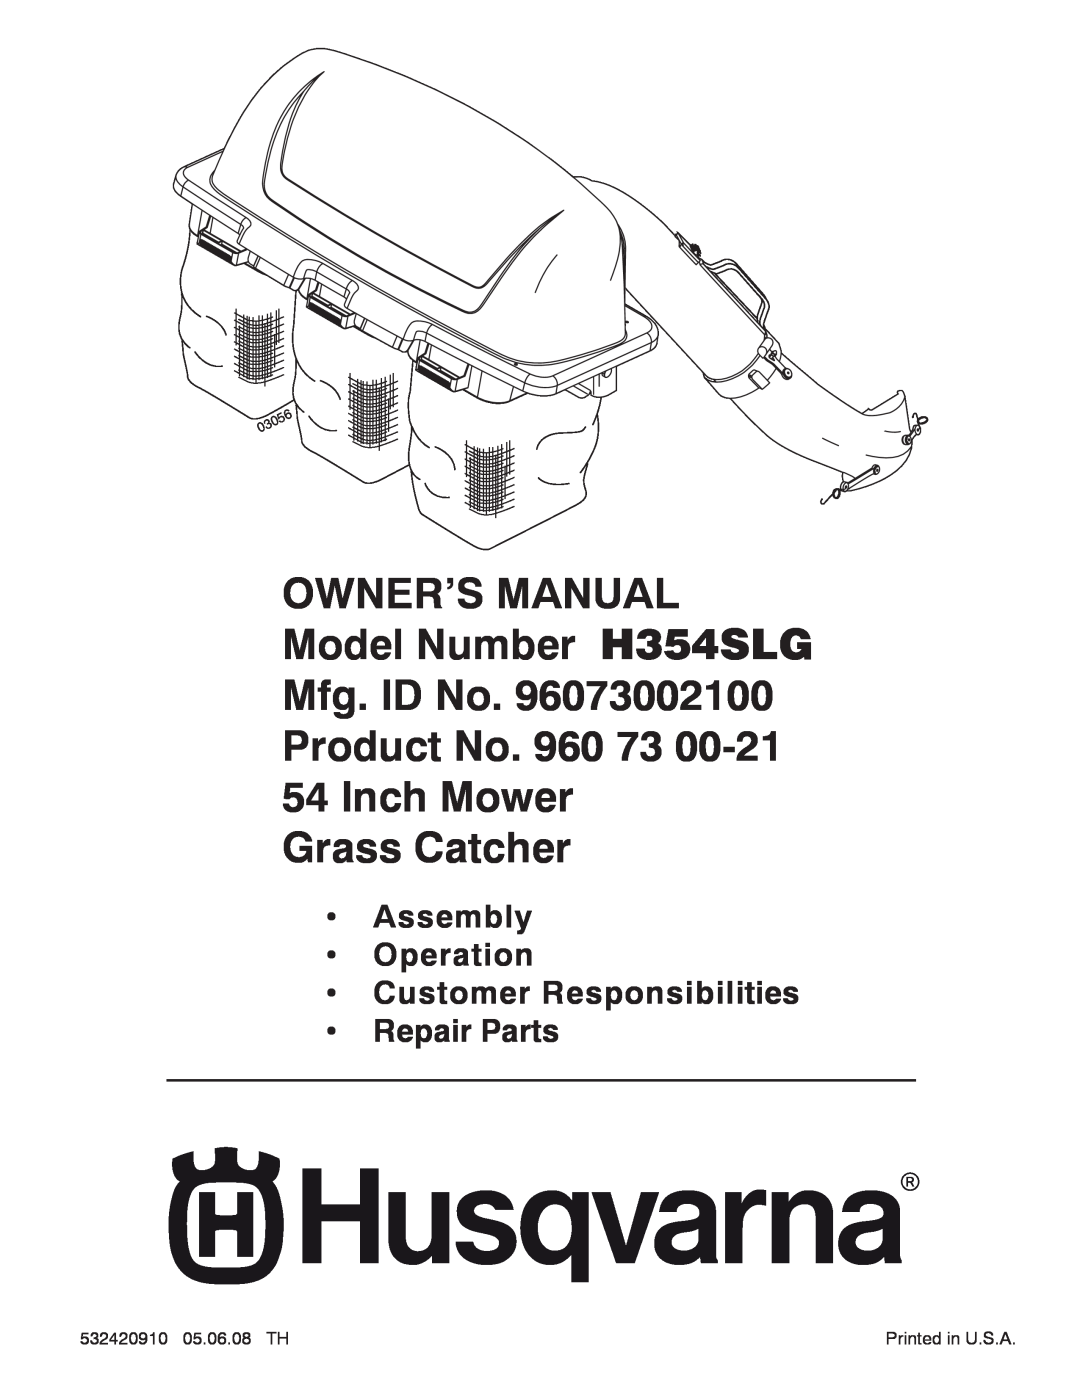 Husqvarna H354SLG owner manual Inch Mower Grass Catcher, Assembly Operation Customer Responsibilities Repair Parts 